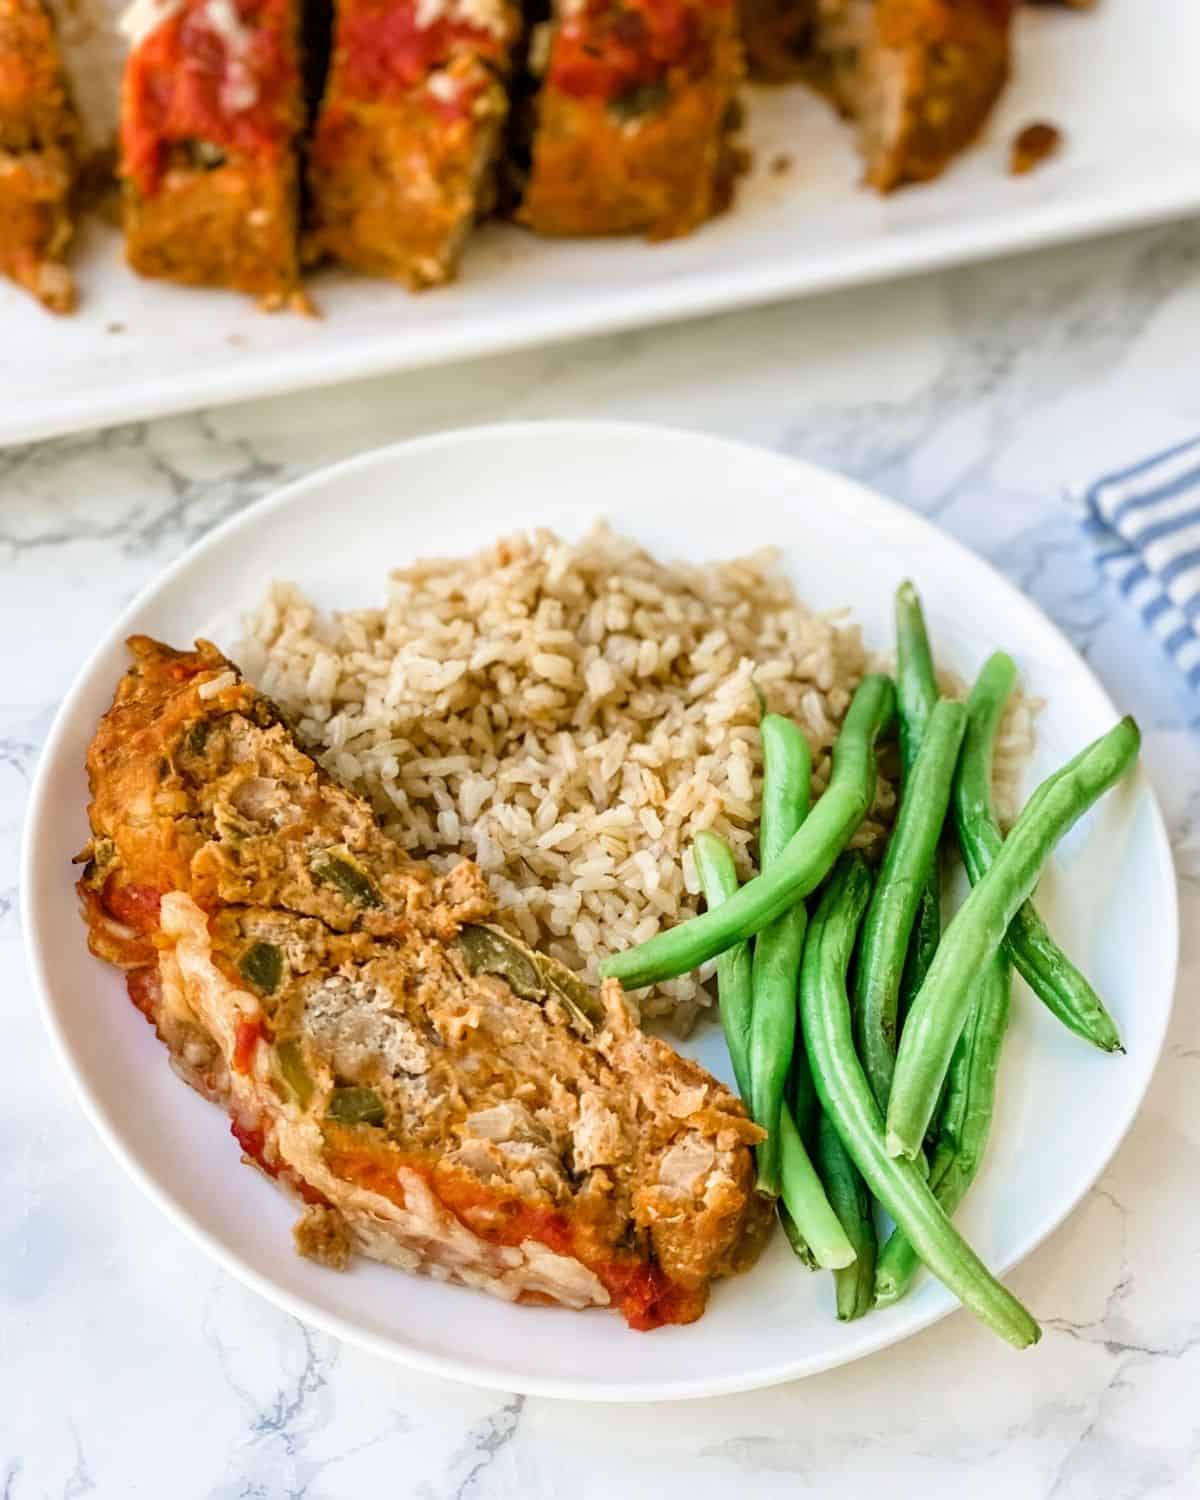 Sausage meatloaf on a plate with green beans and rice.